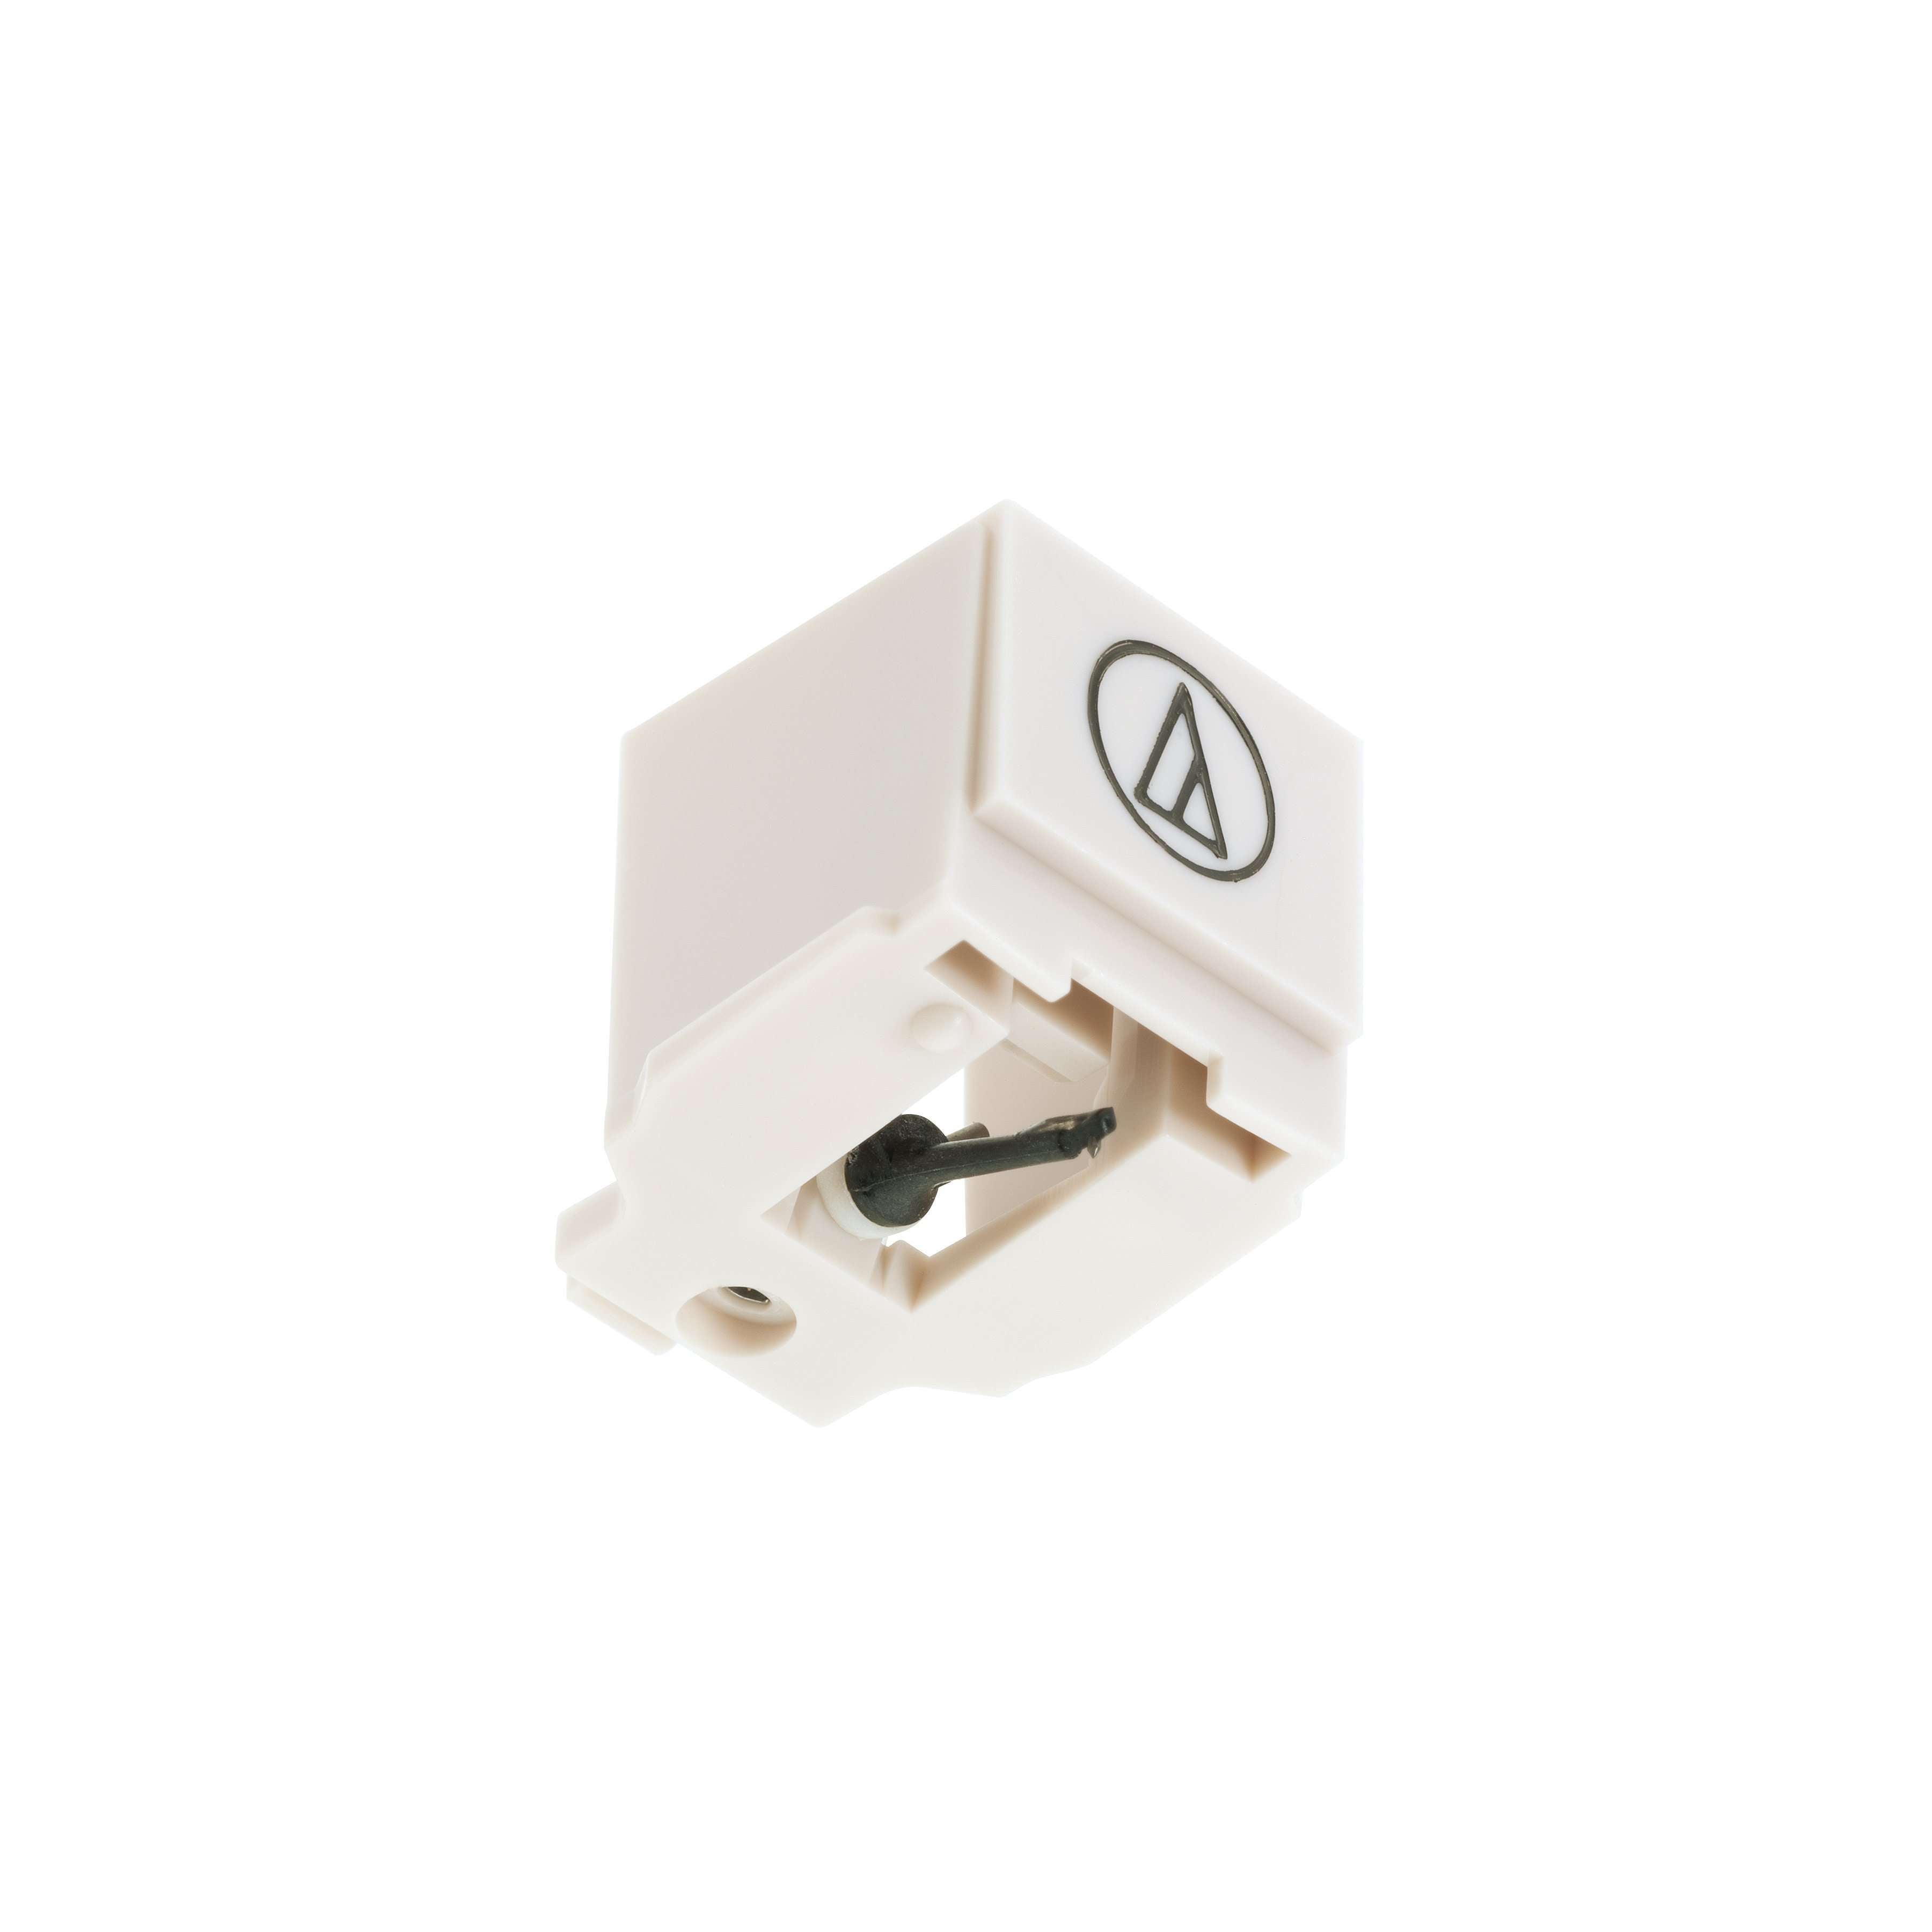 AUDIO ACCESSORIES - ATN-3600L - Stylus for Audio Technica LP60 – Flying Out